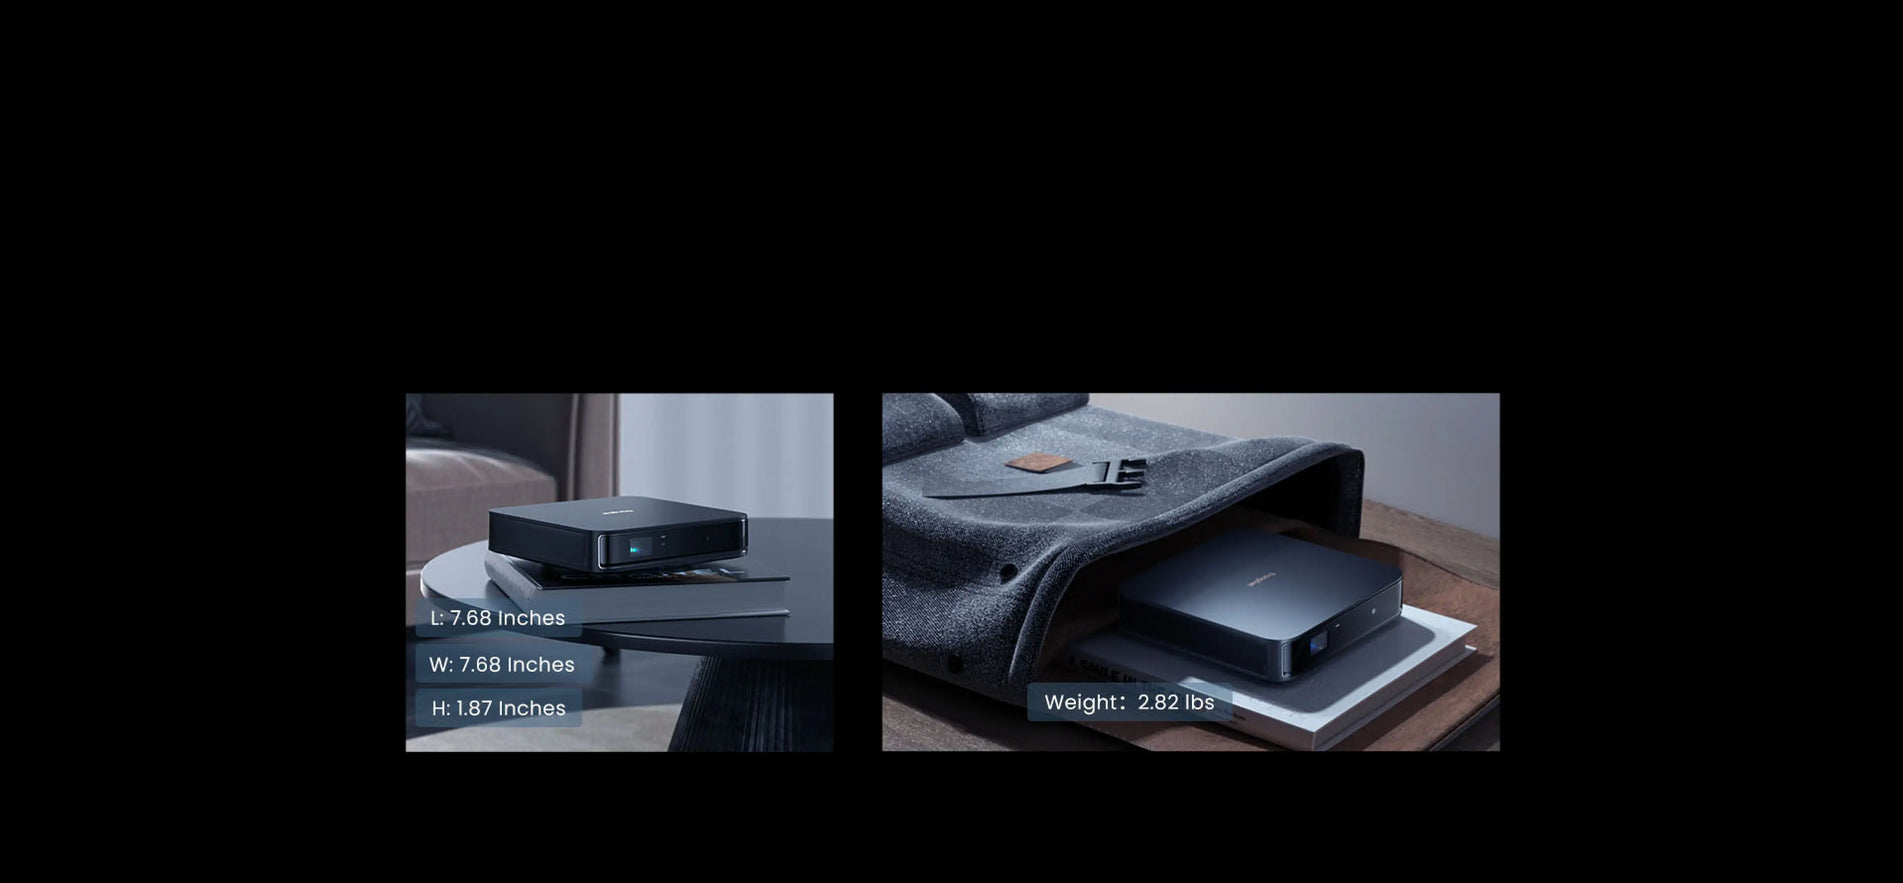 The Atom projector demonstrating ultra-thin and compact design, fitting easily into a bag or backpack for portable immersive entertainment, with dimensions and weight specified